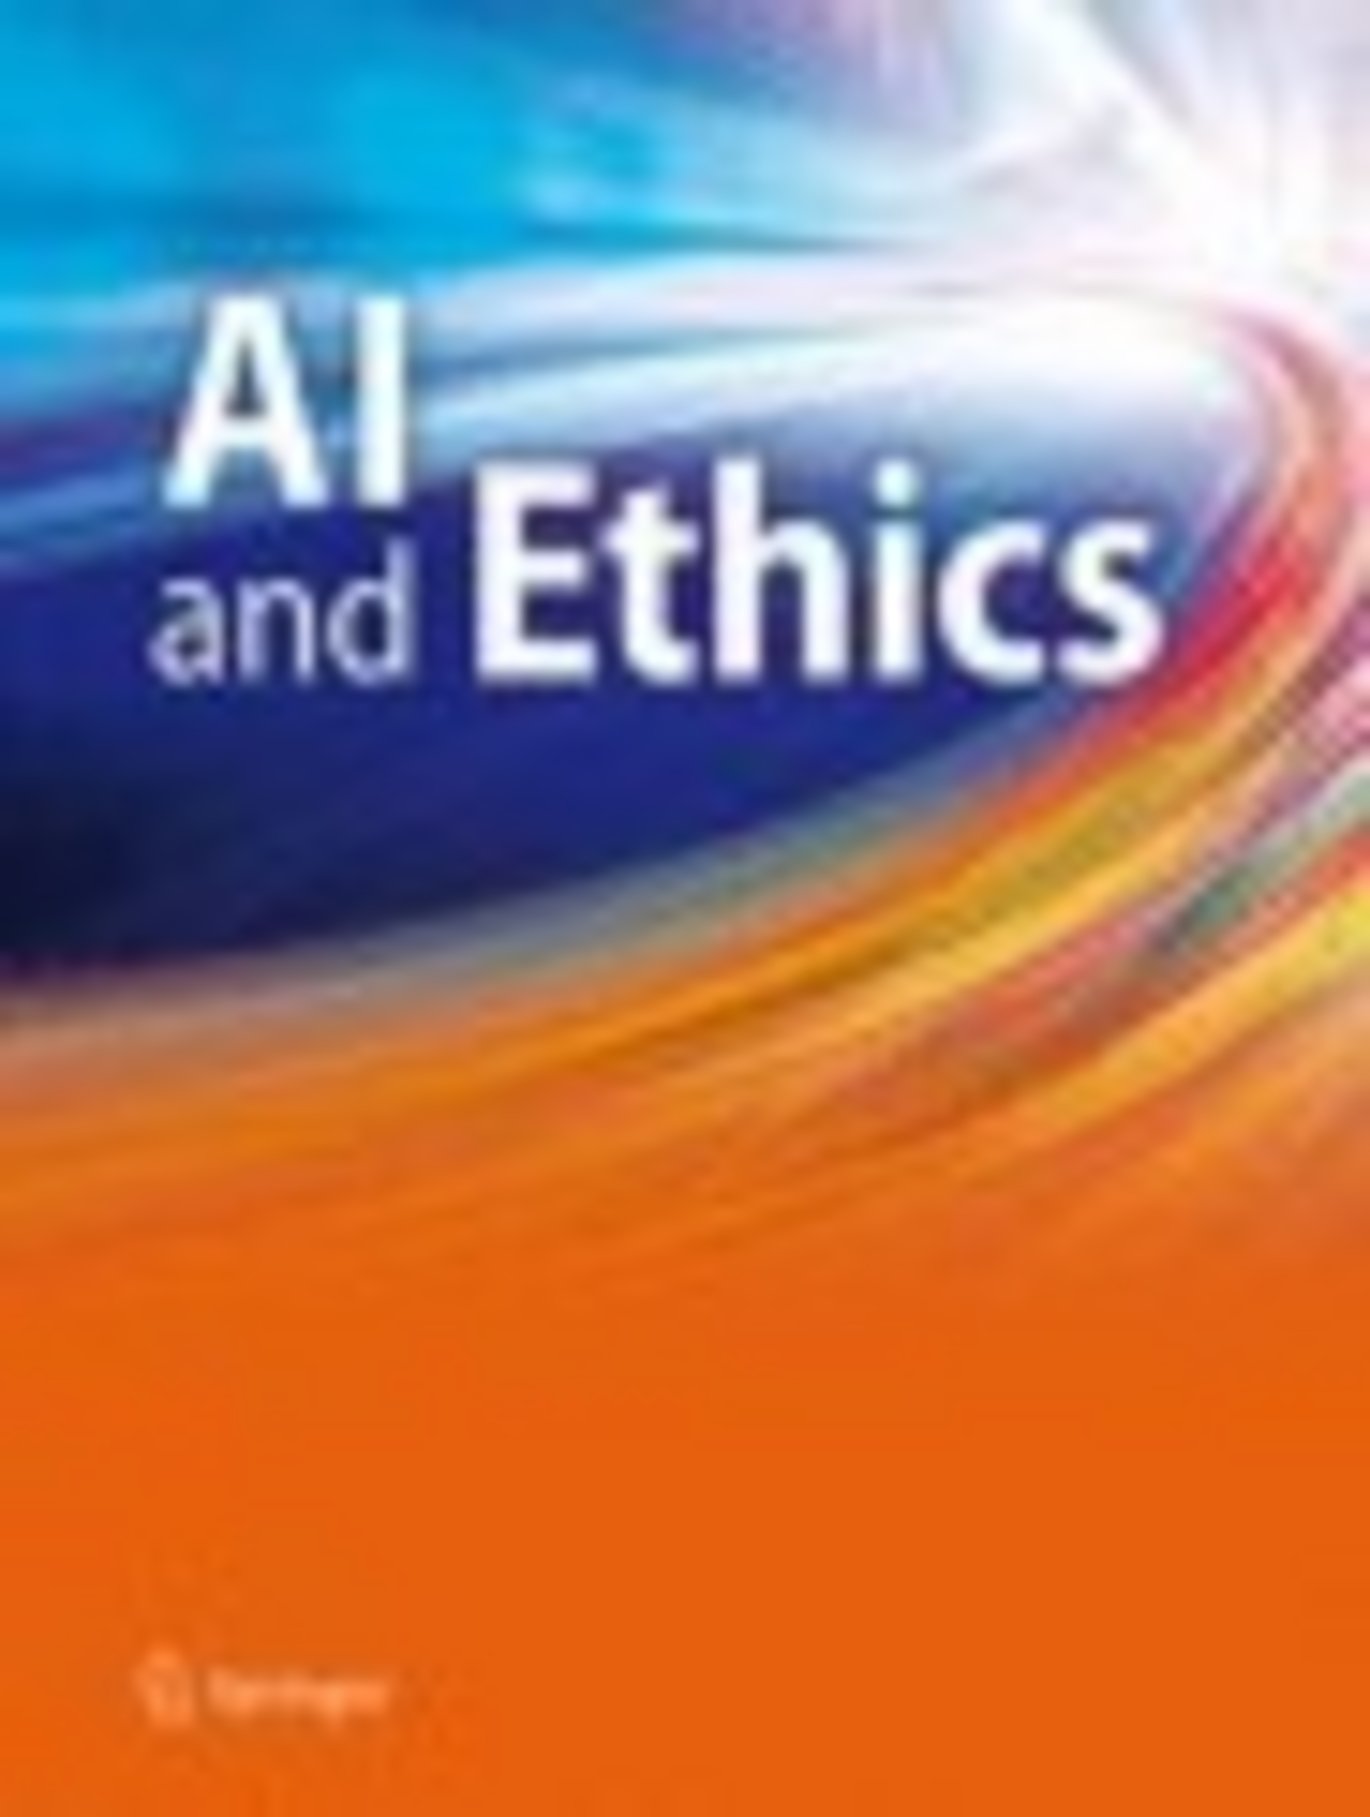 AI and Ethics, published by Springer